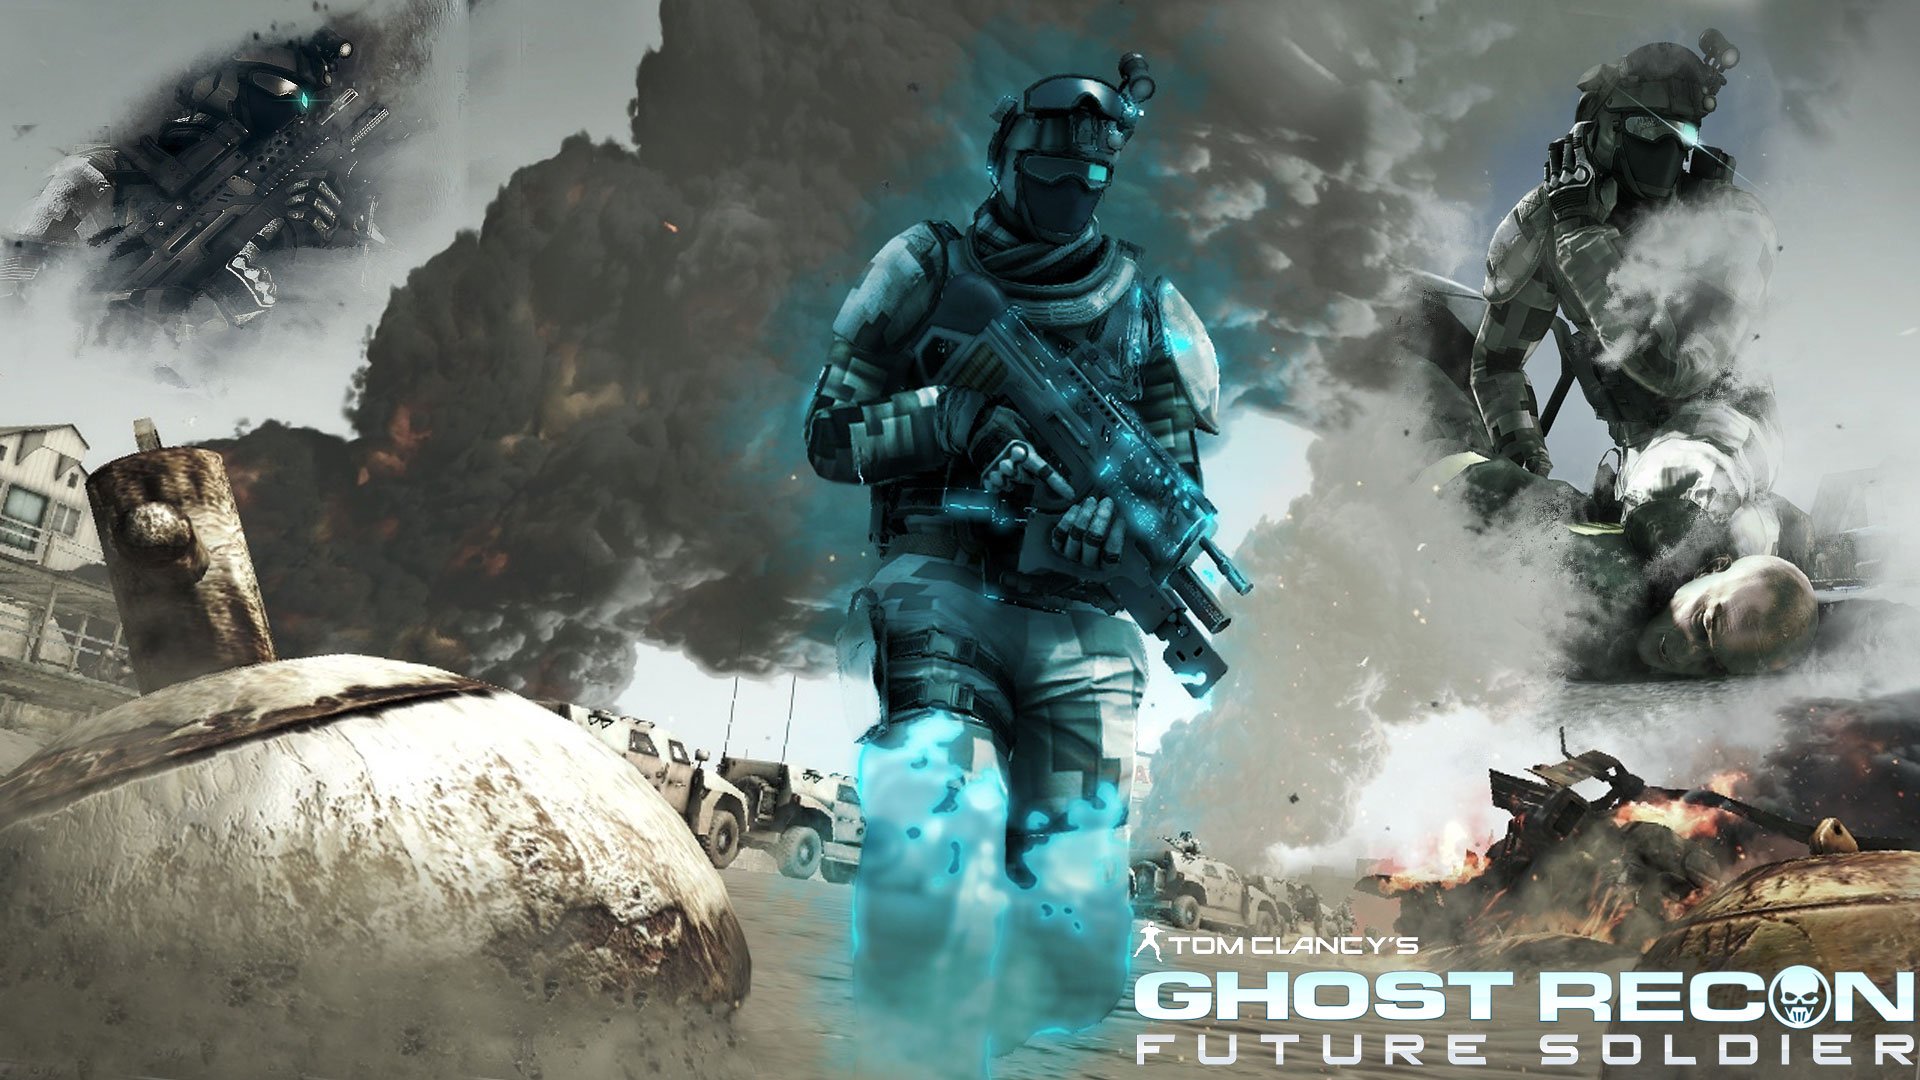 download game ghost recon future soldier apk full